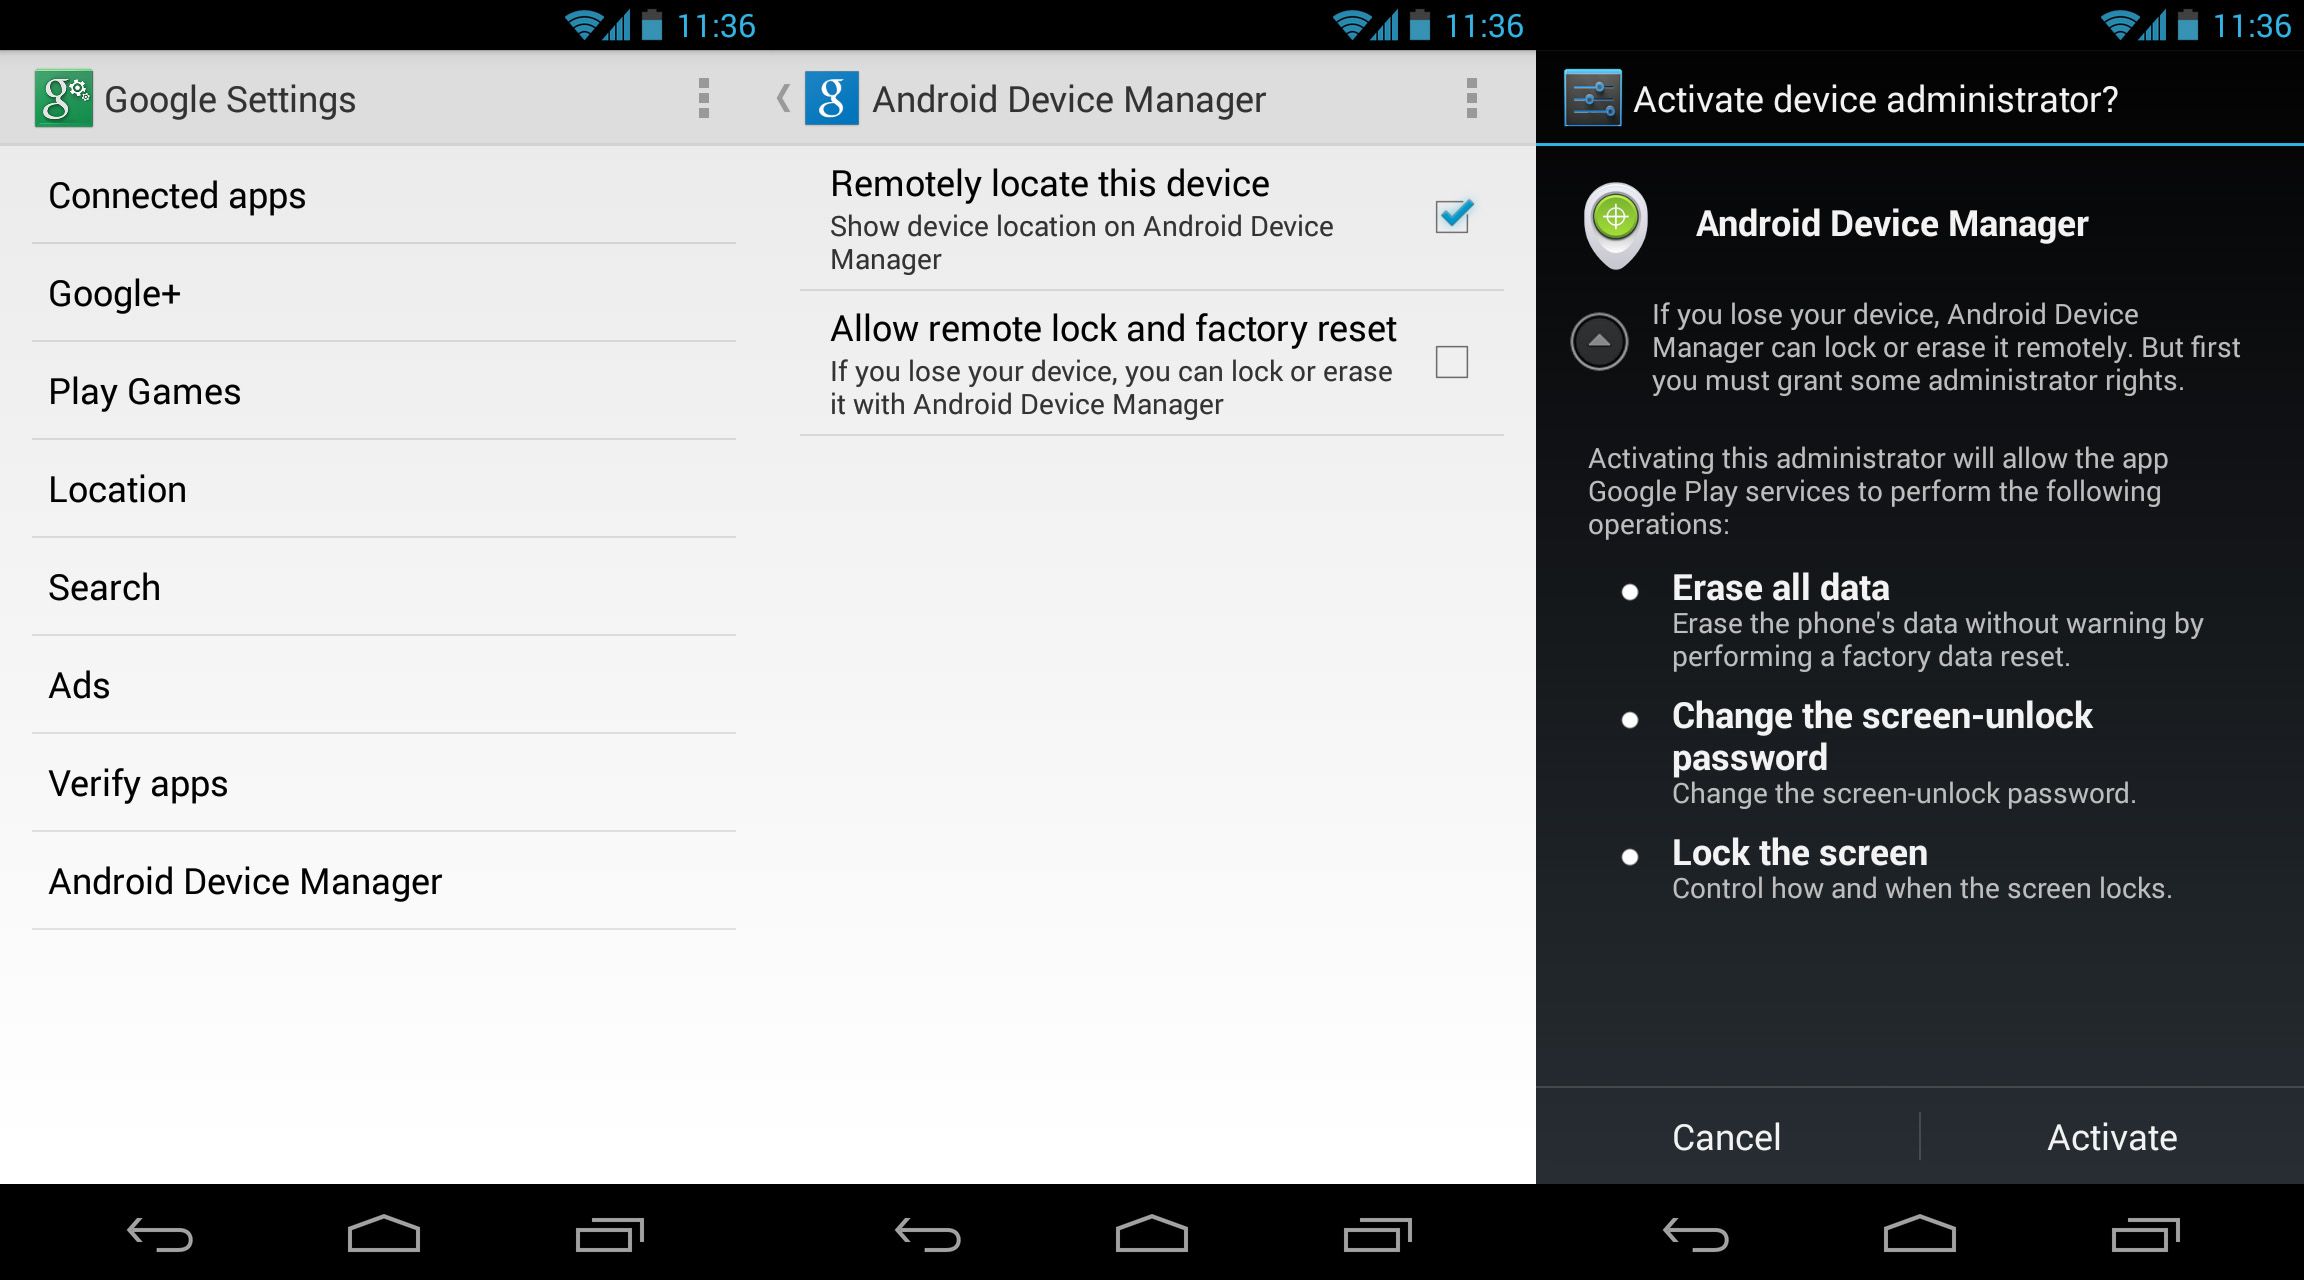 Android-device-manager-activation